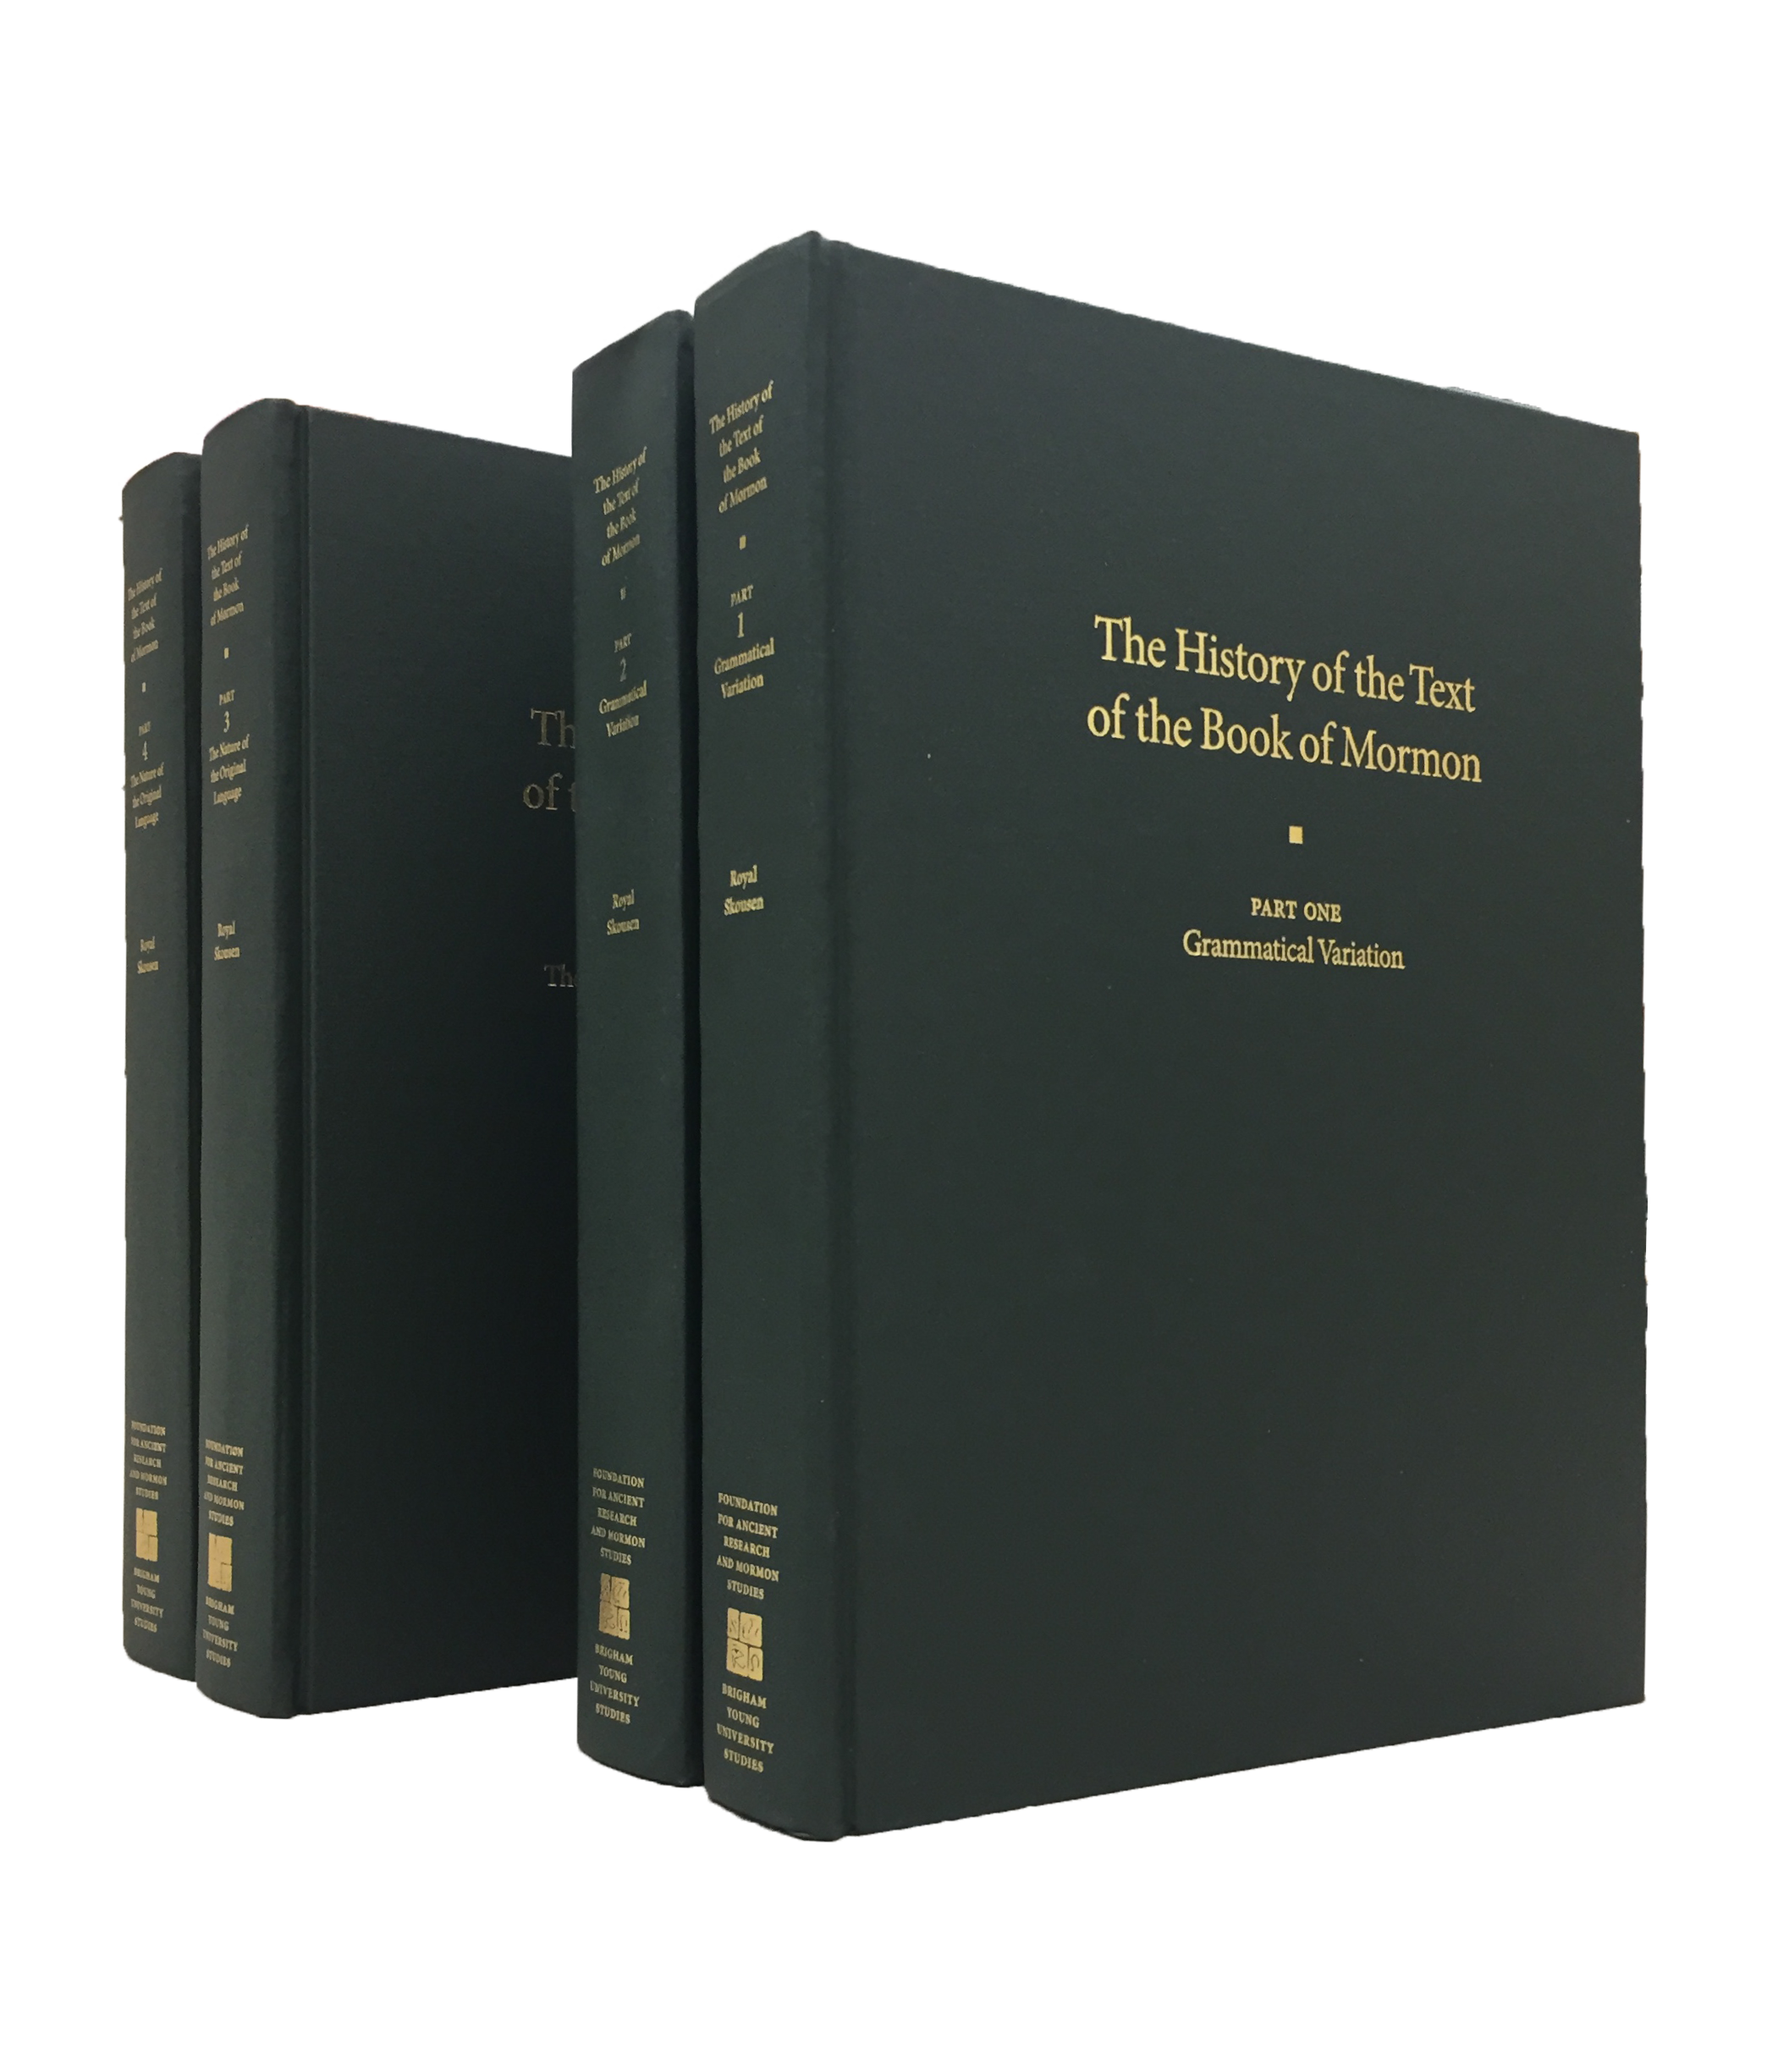 The History of the Text of the Book of Mormon